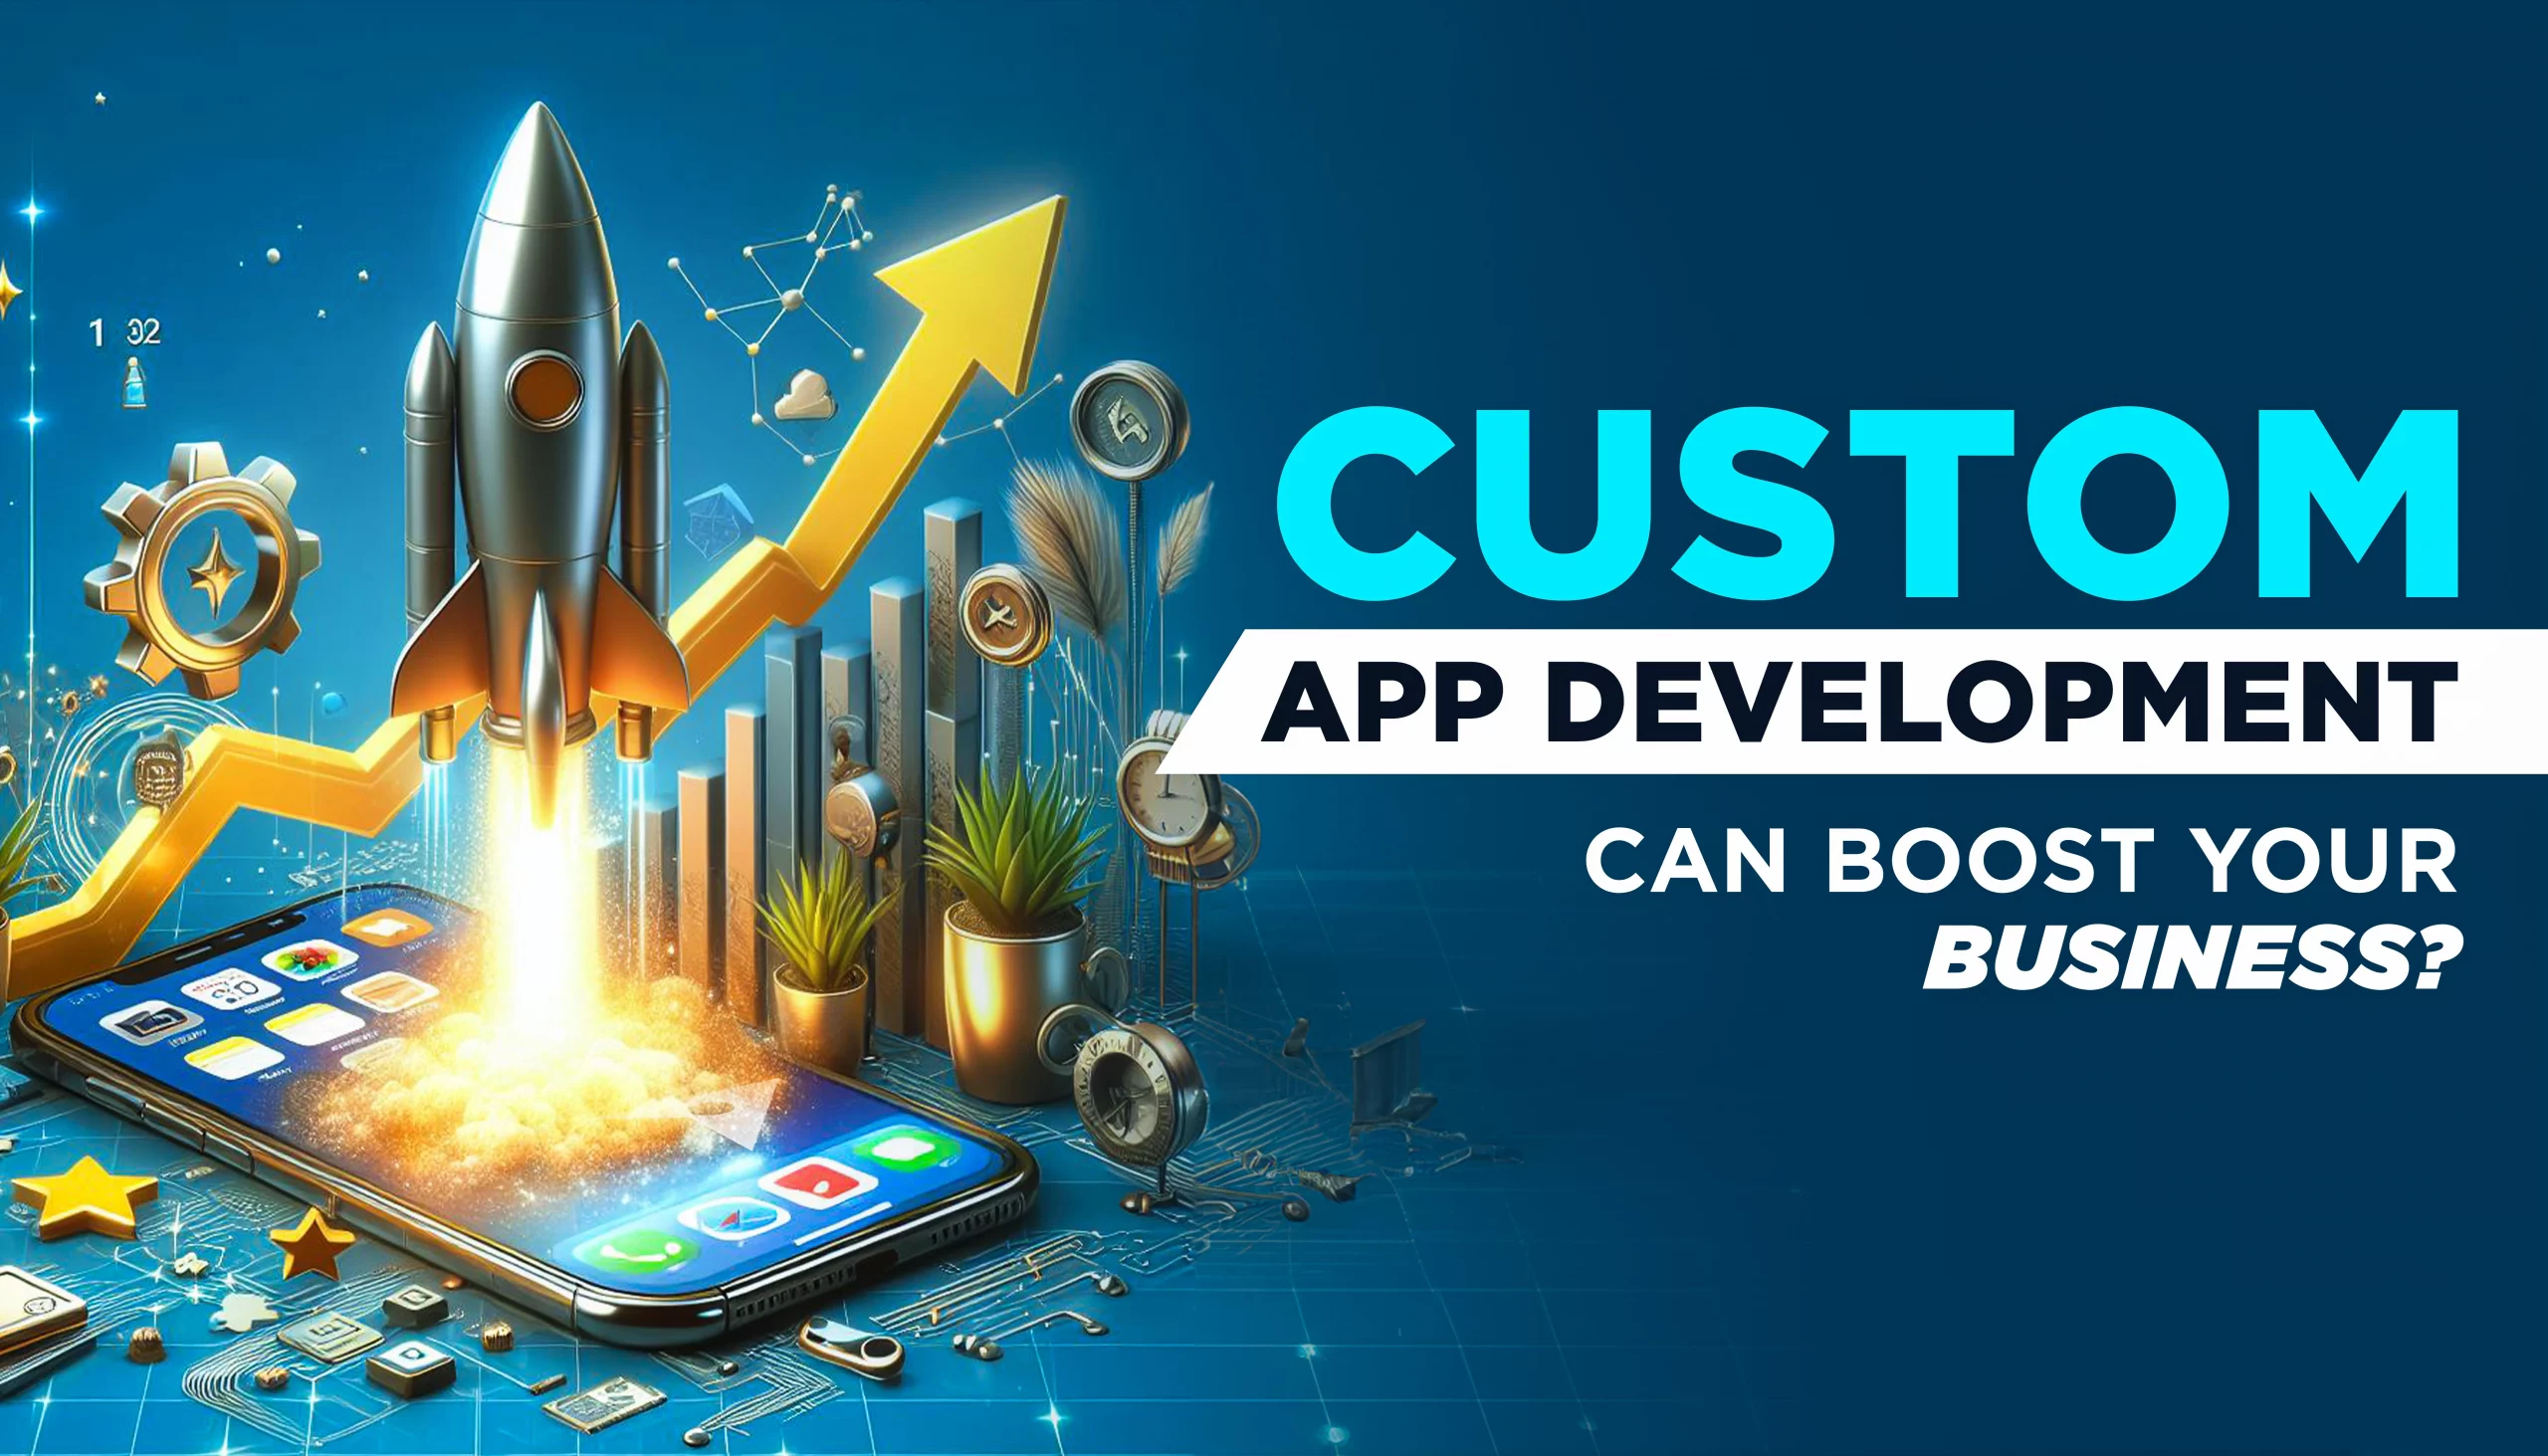 How Custom App Development Can Boost Your Business